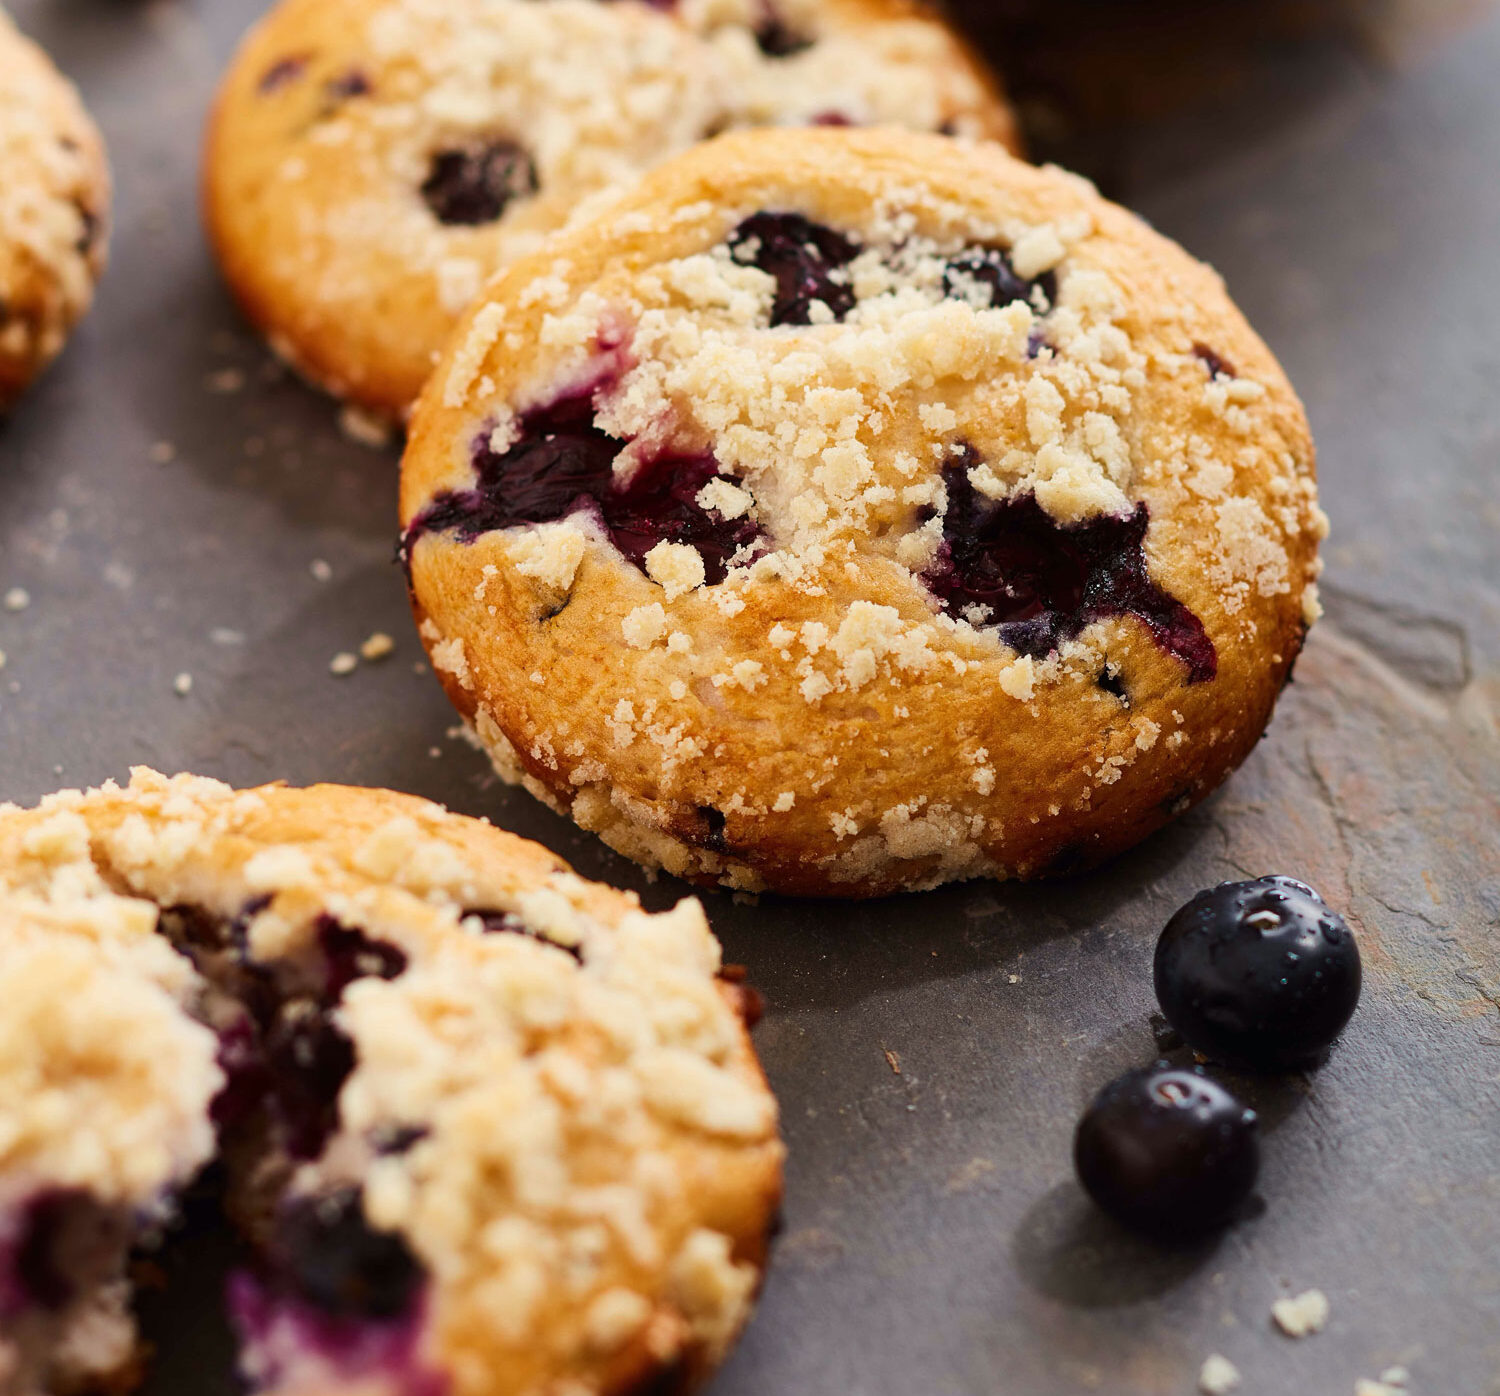 Fresh-baked Blueberry Cheesecake Muffins sitting on a stone counter.